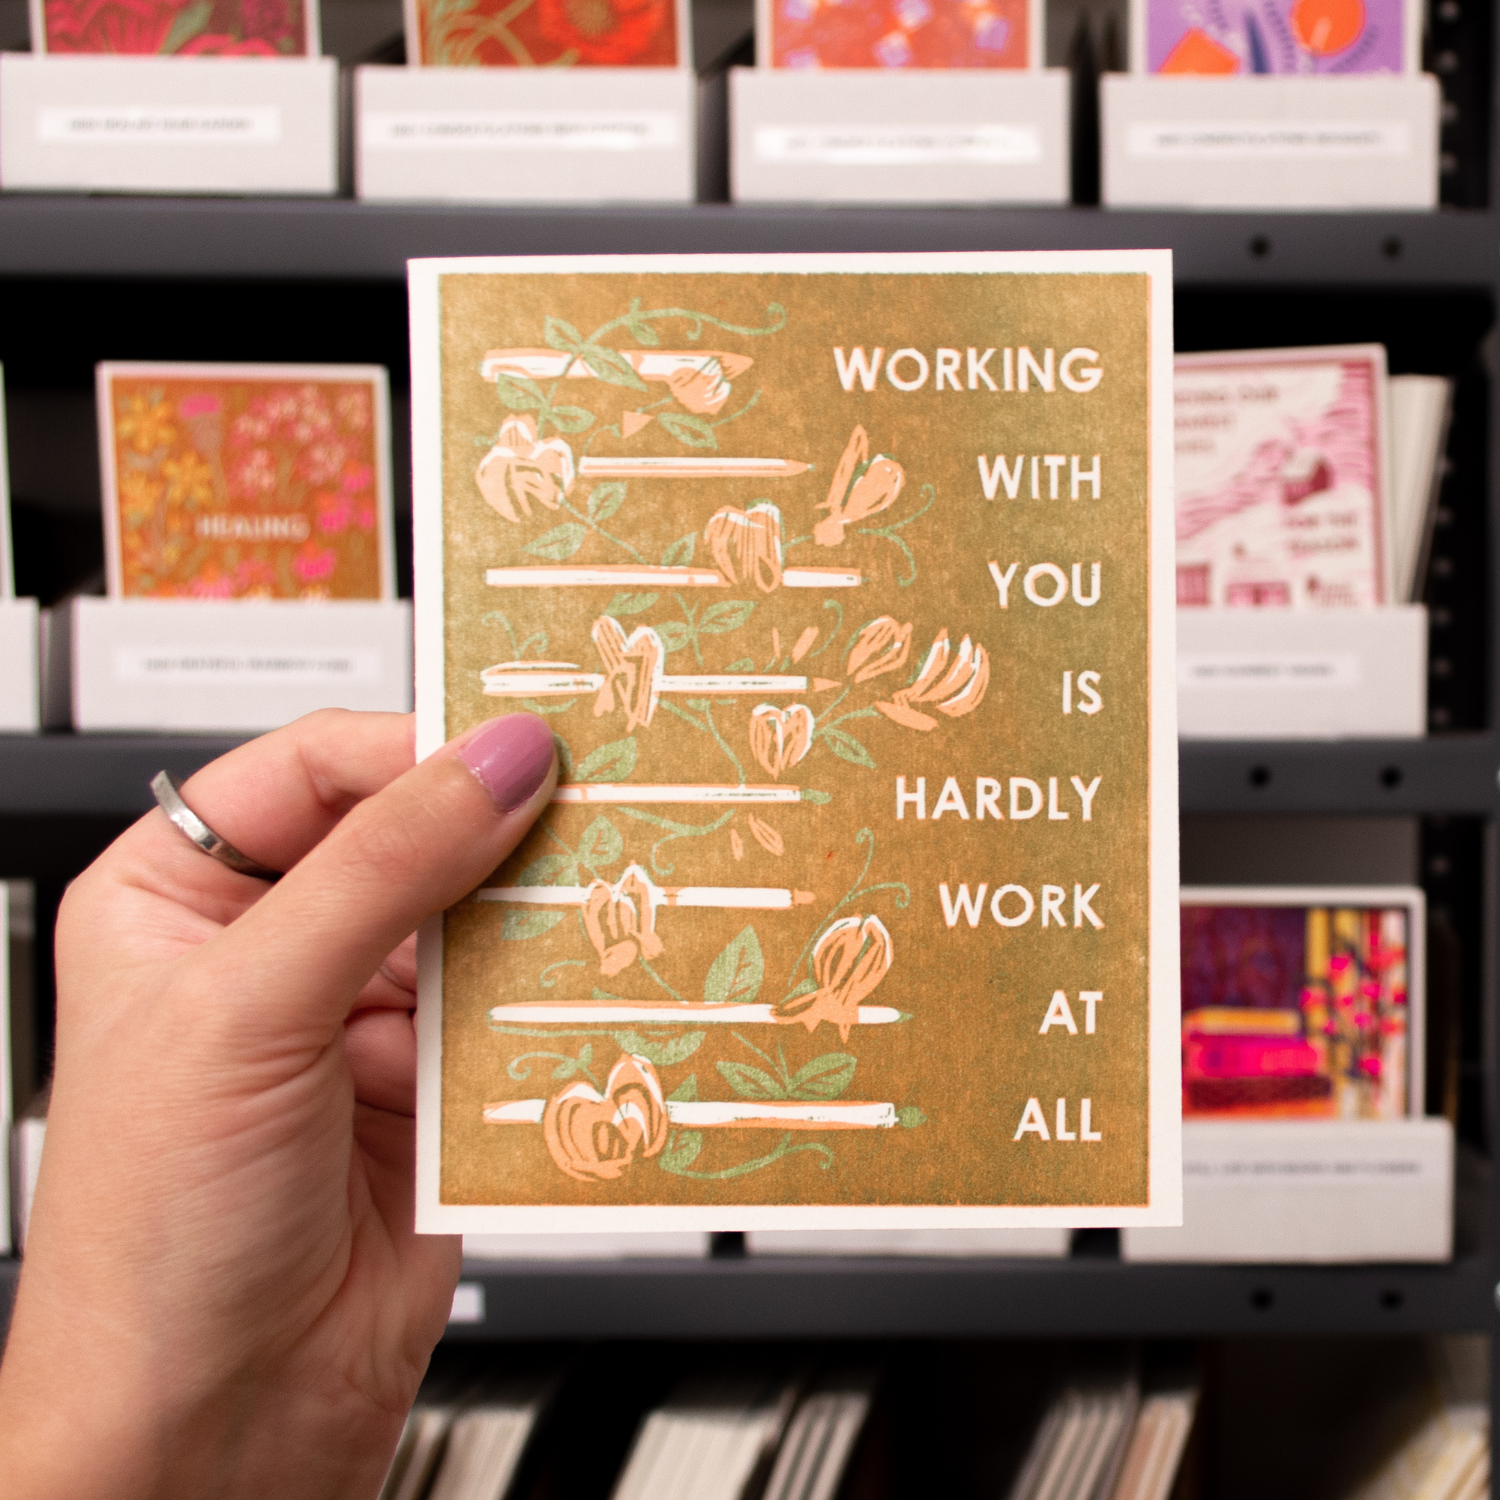 Working with you is hardly work at all letterpress card